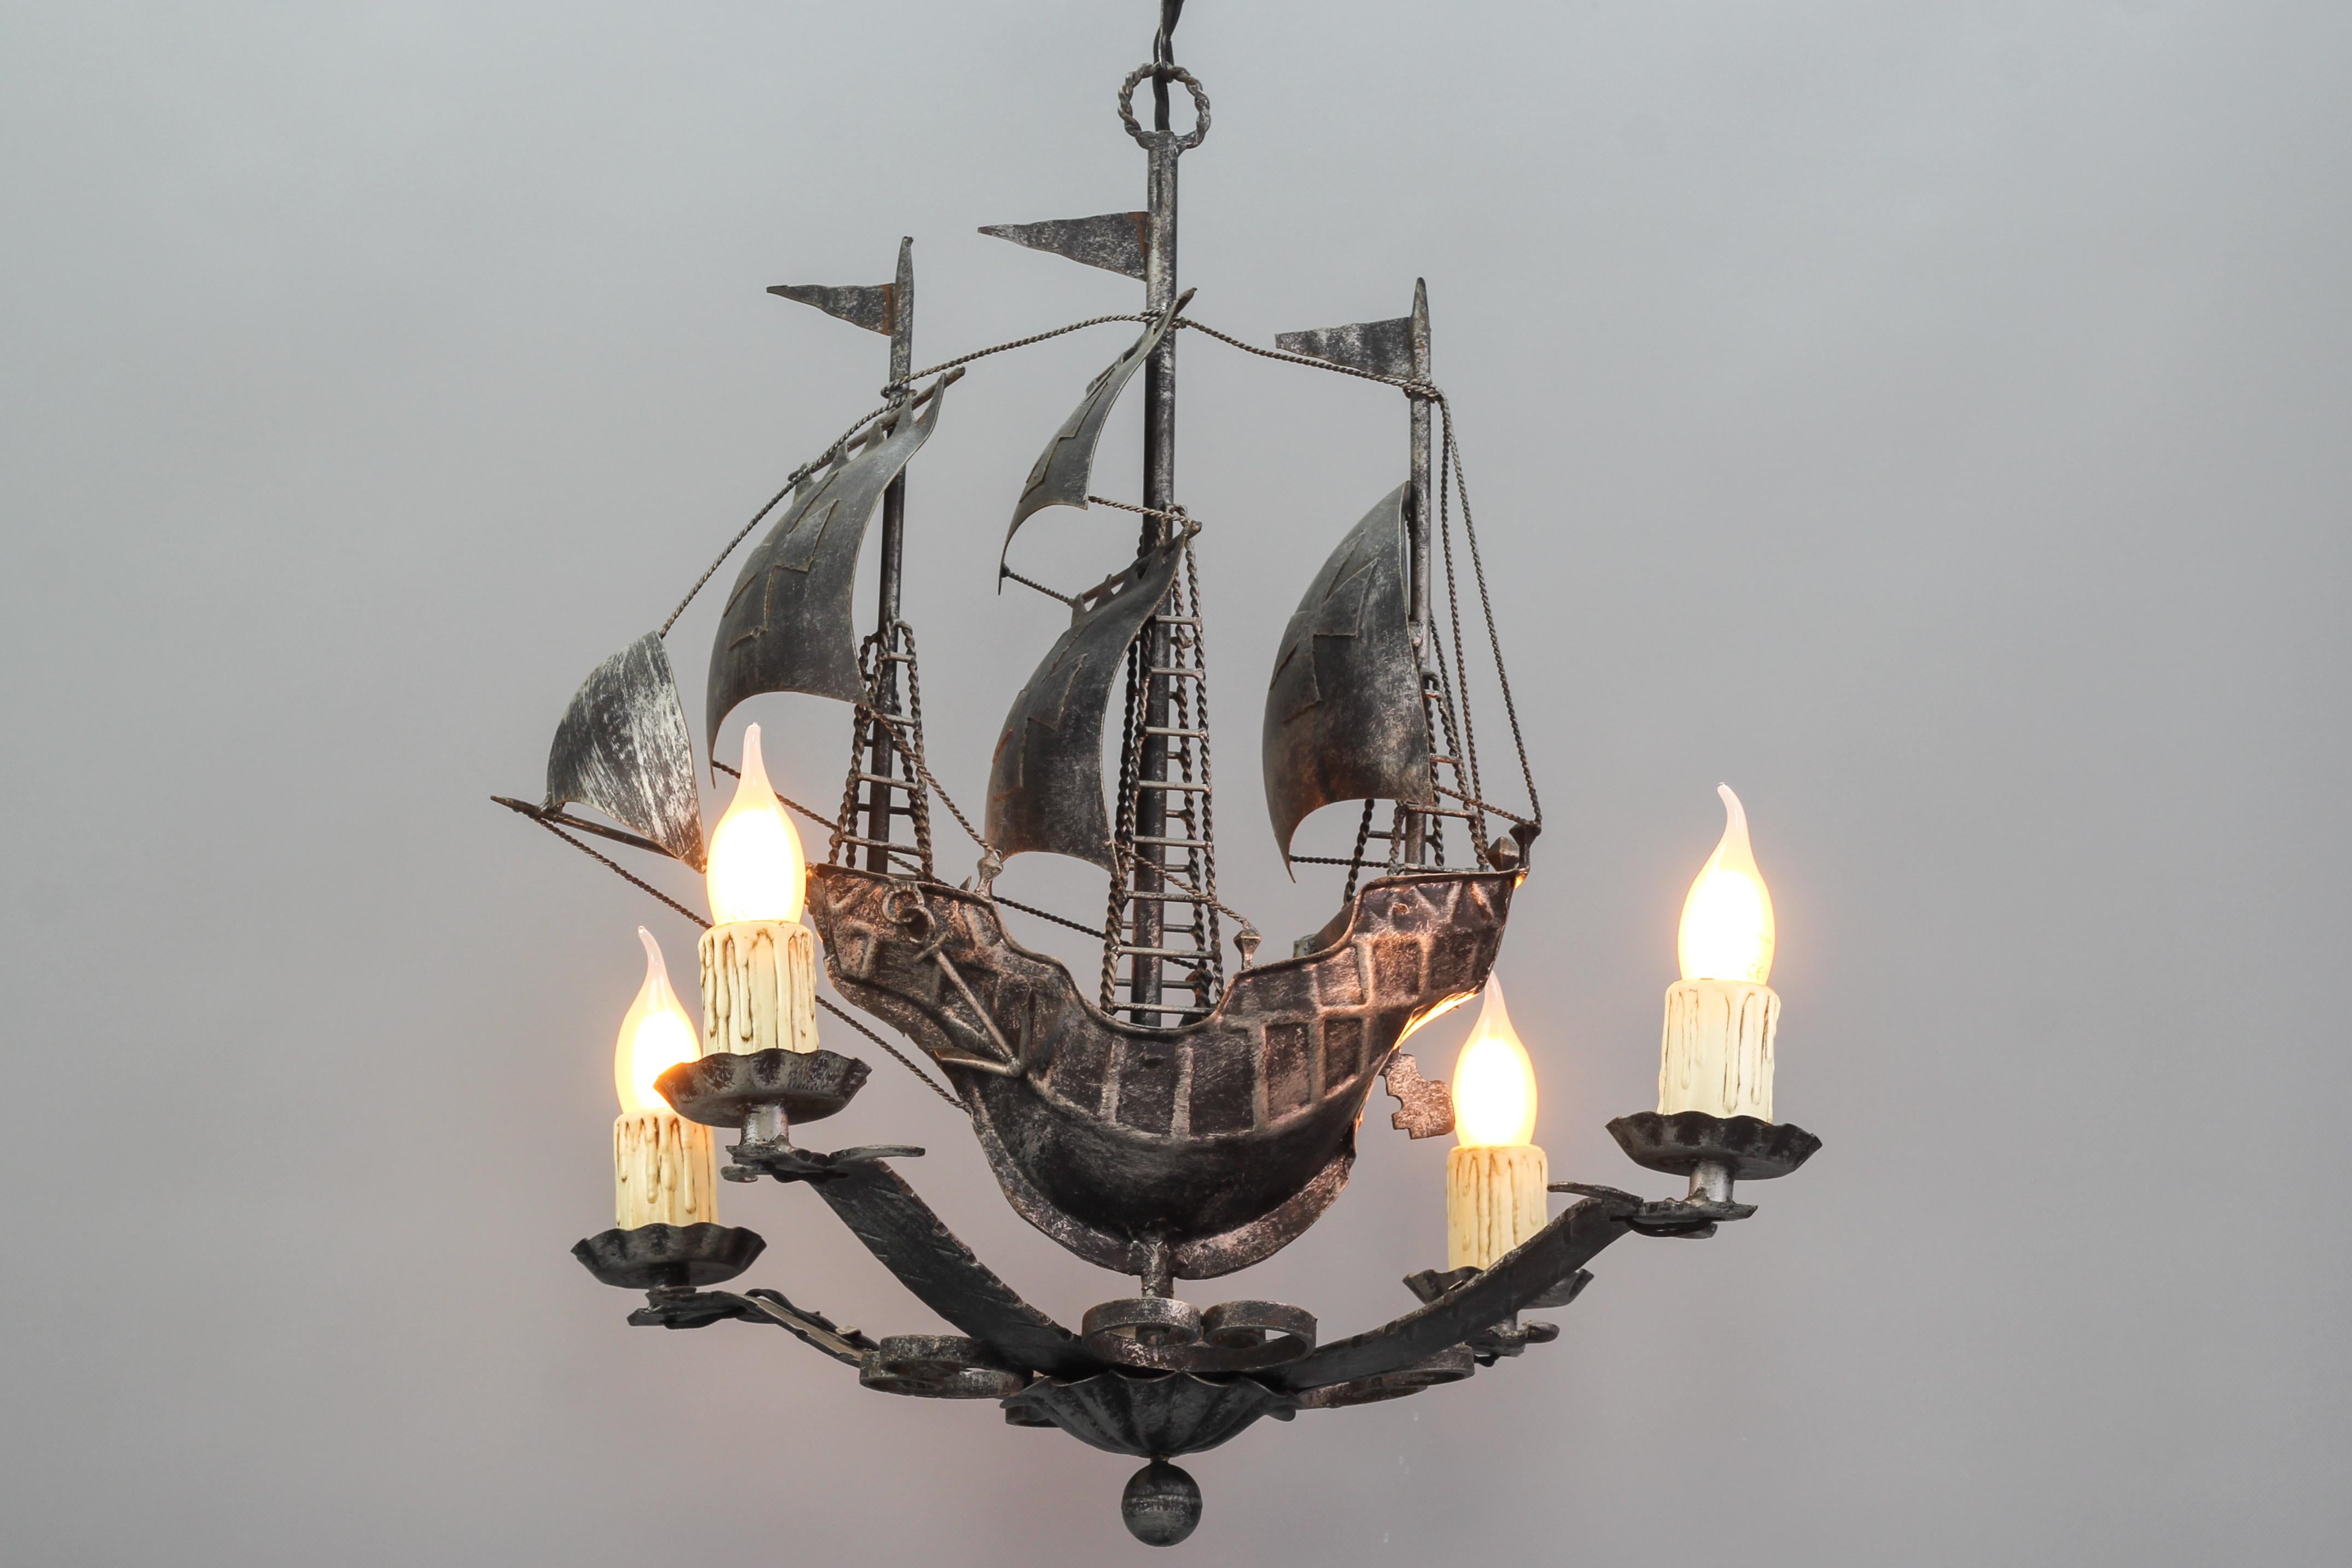 Wrought iron Spanish Galleon sailing ship-shaped four-light chandelier, the 1950s
The impressive silver-colored iron four-light chandelier represents a beautiful Spanish galleon with three masts and sailing ship details such as sails, ropes,